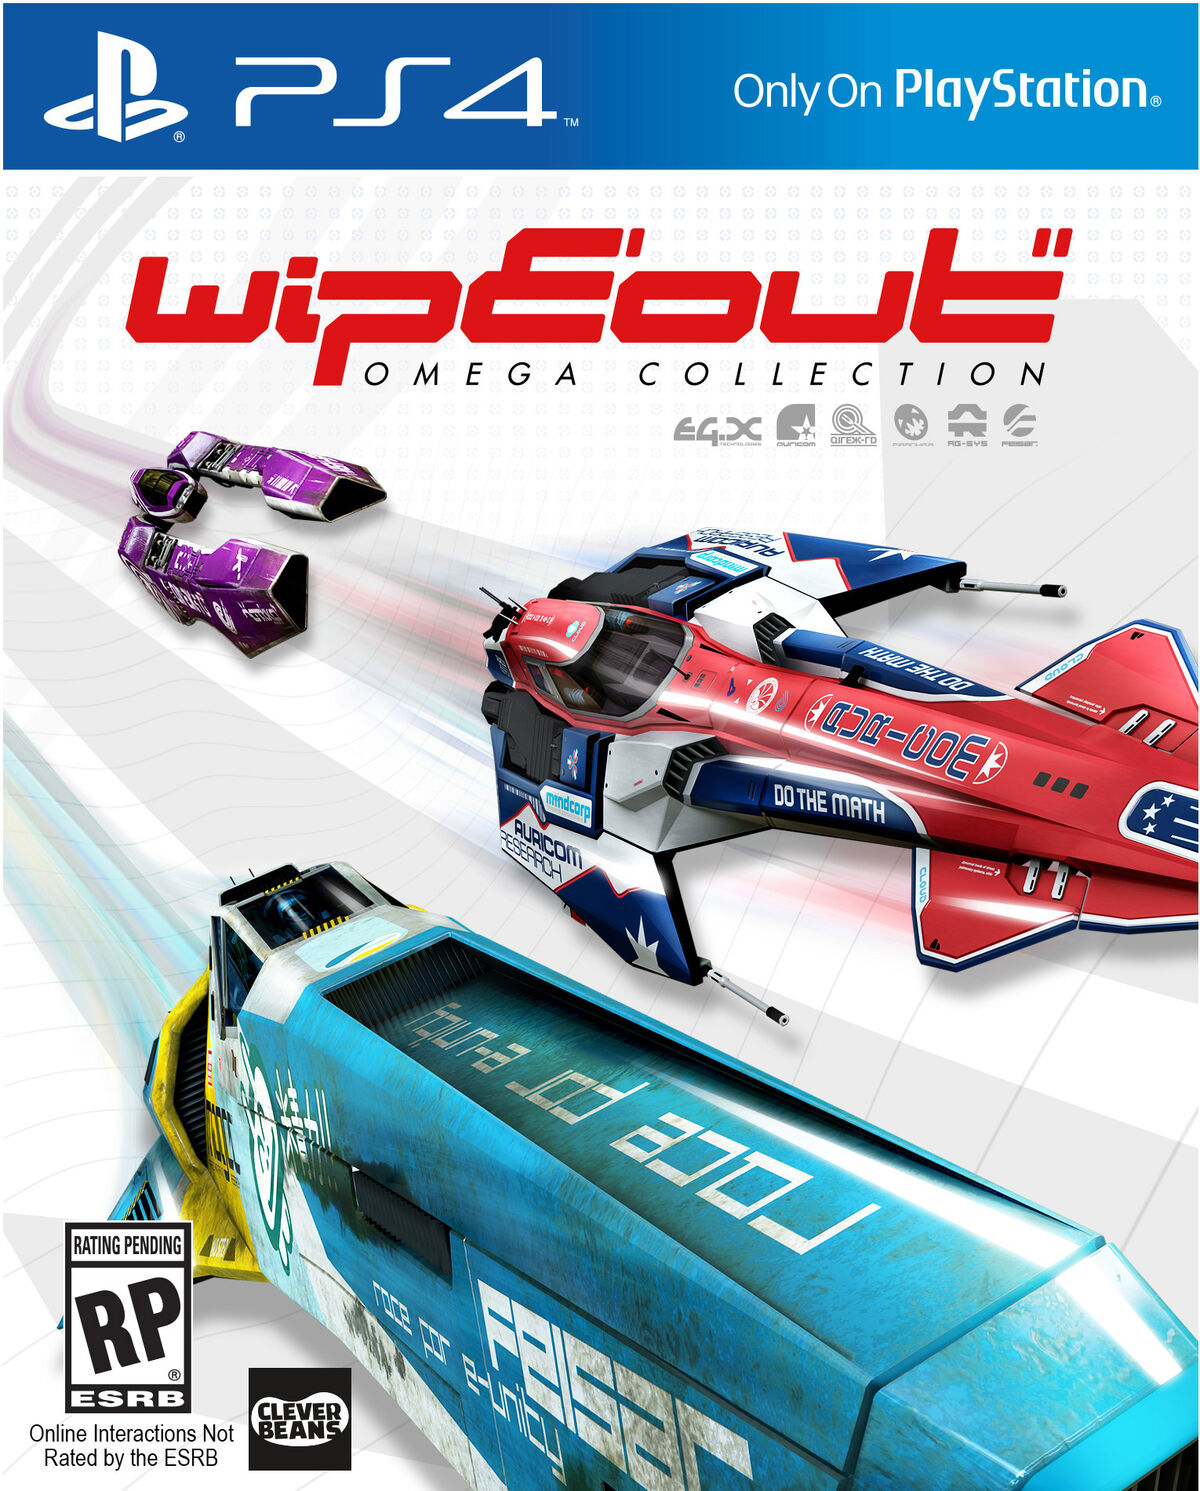 WipEout Omega' Looks, Sounds, and Plays Brilliantly on PSVR